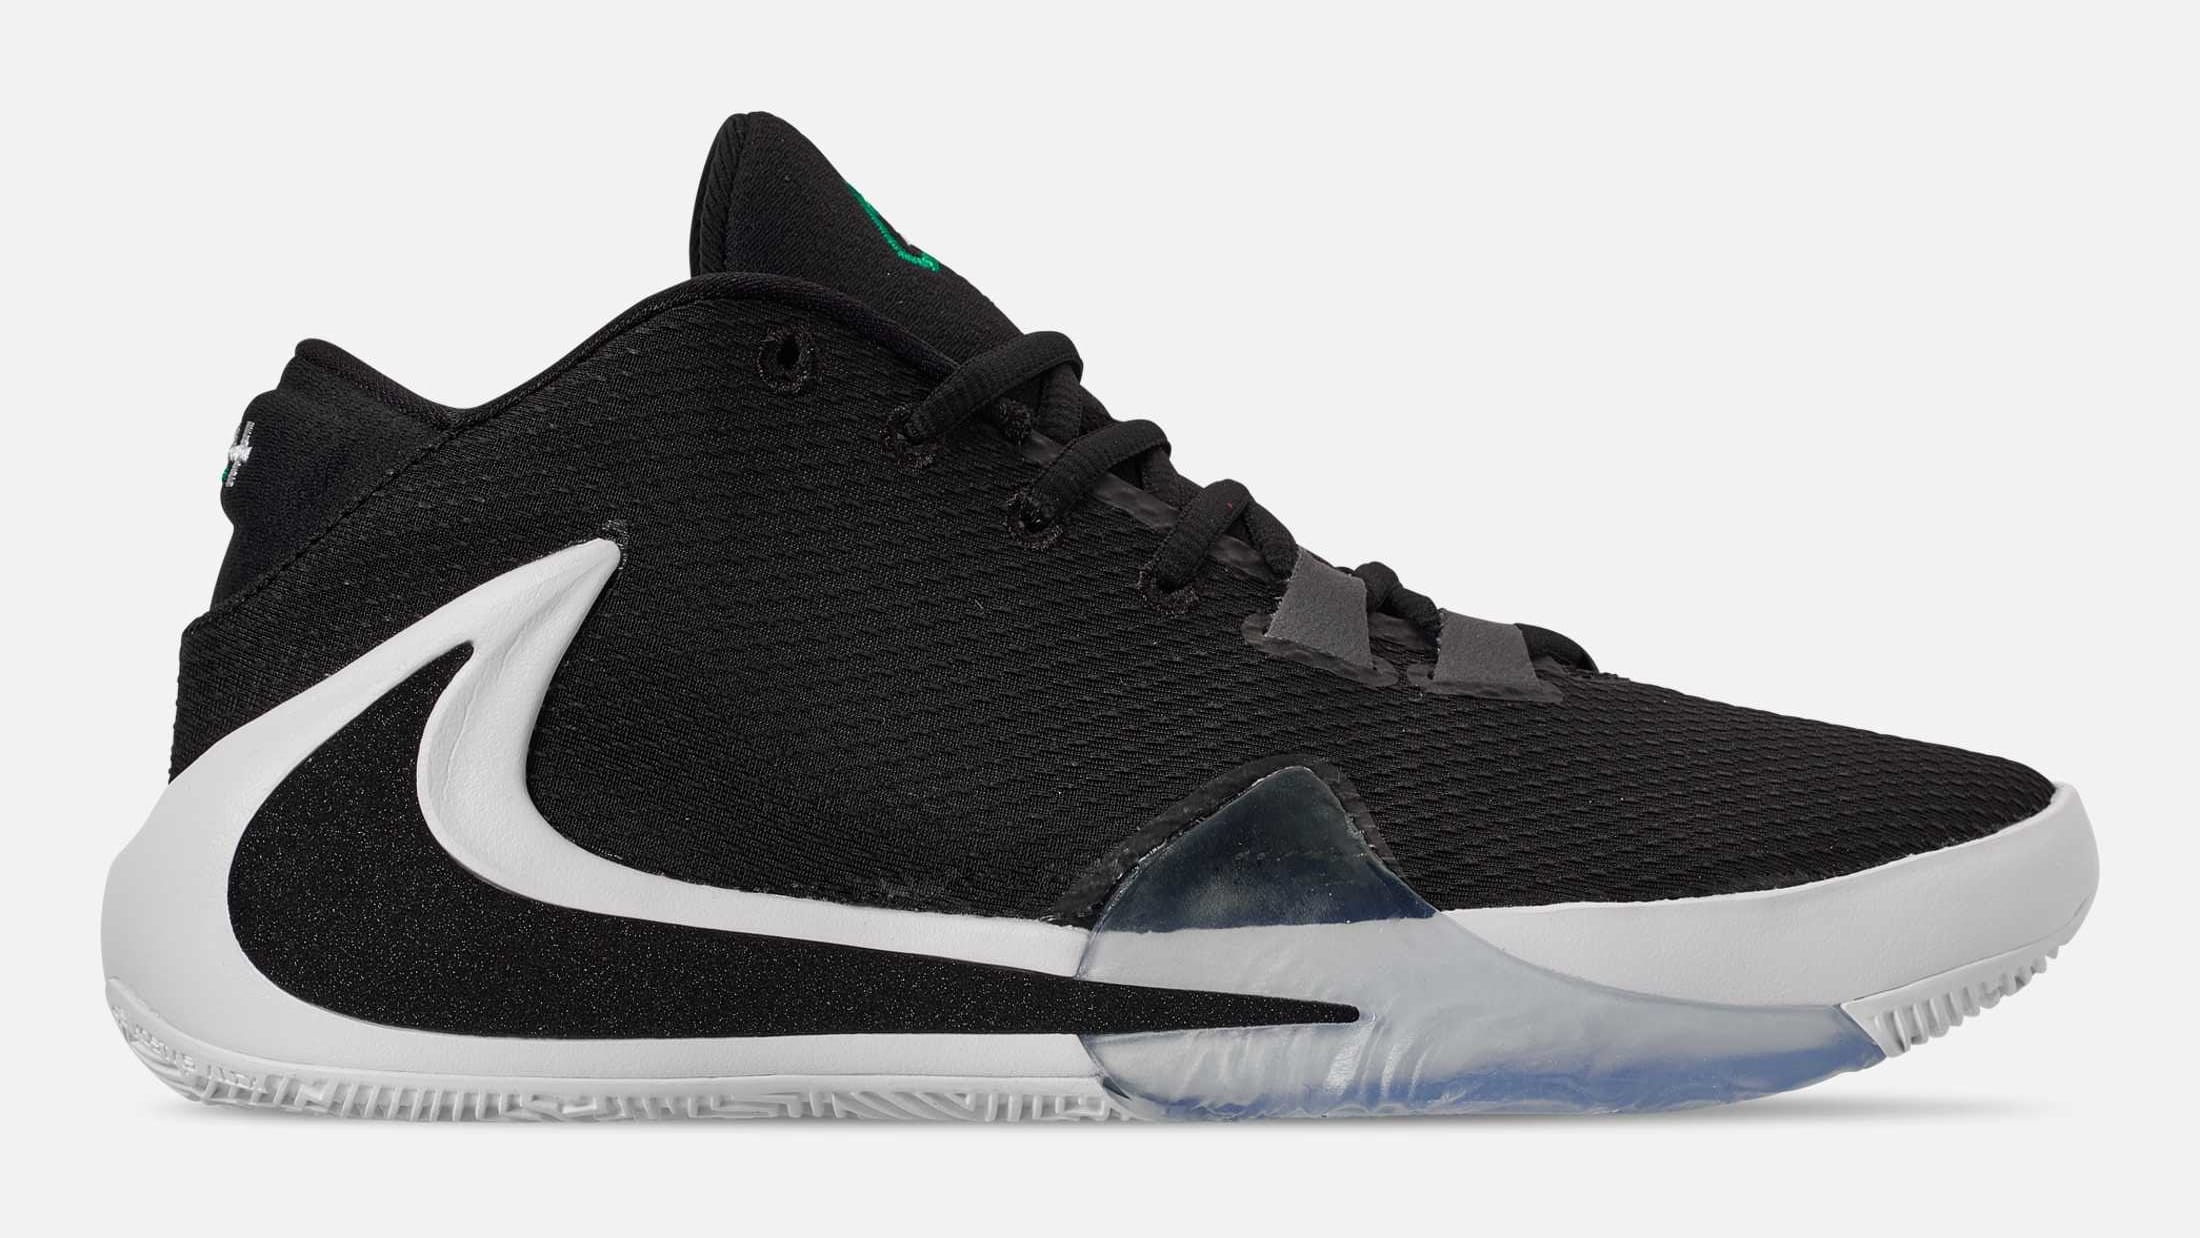 Giannis' Nike Zoom Freak 1 Drops Next Month: Detailed Images